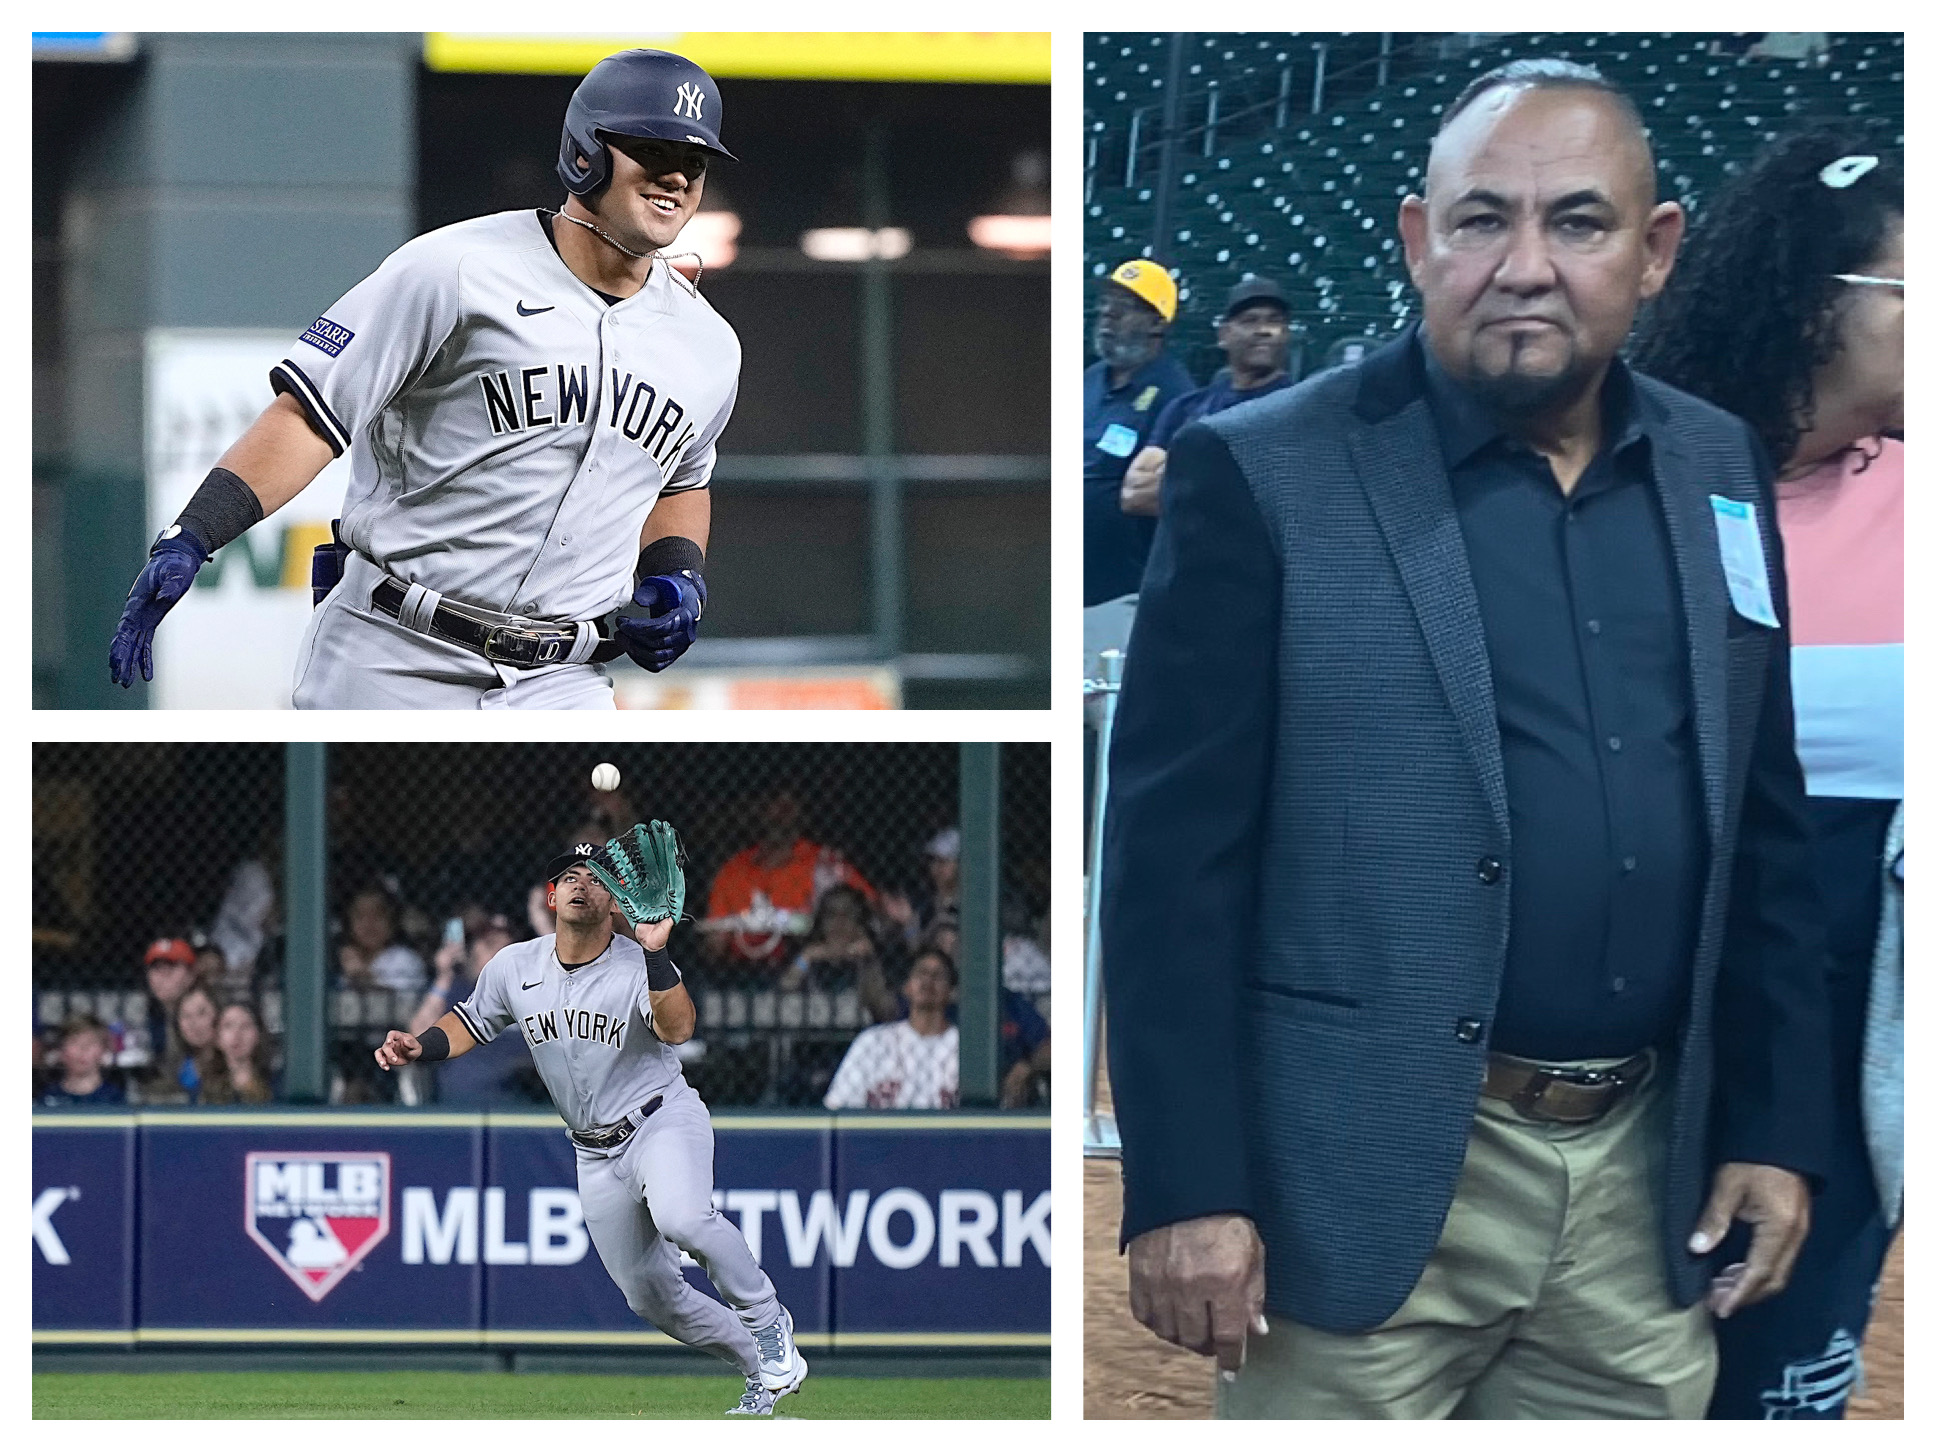 Jasson Dominguez was in womb when dad imagined Yankees career, then had  bat, ball and glove in crib 